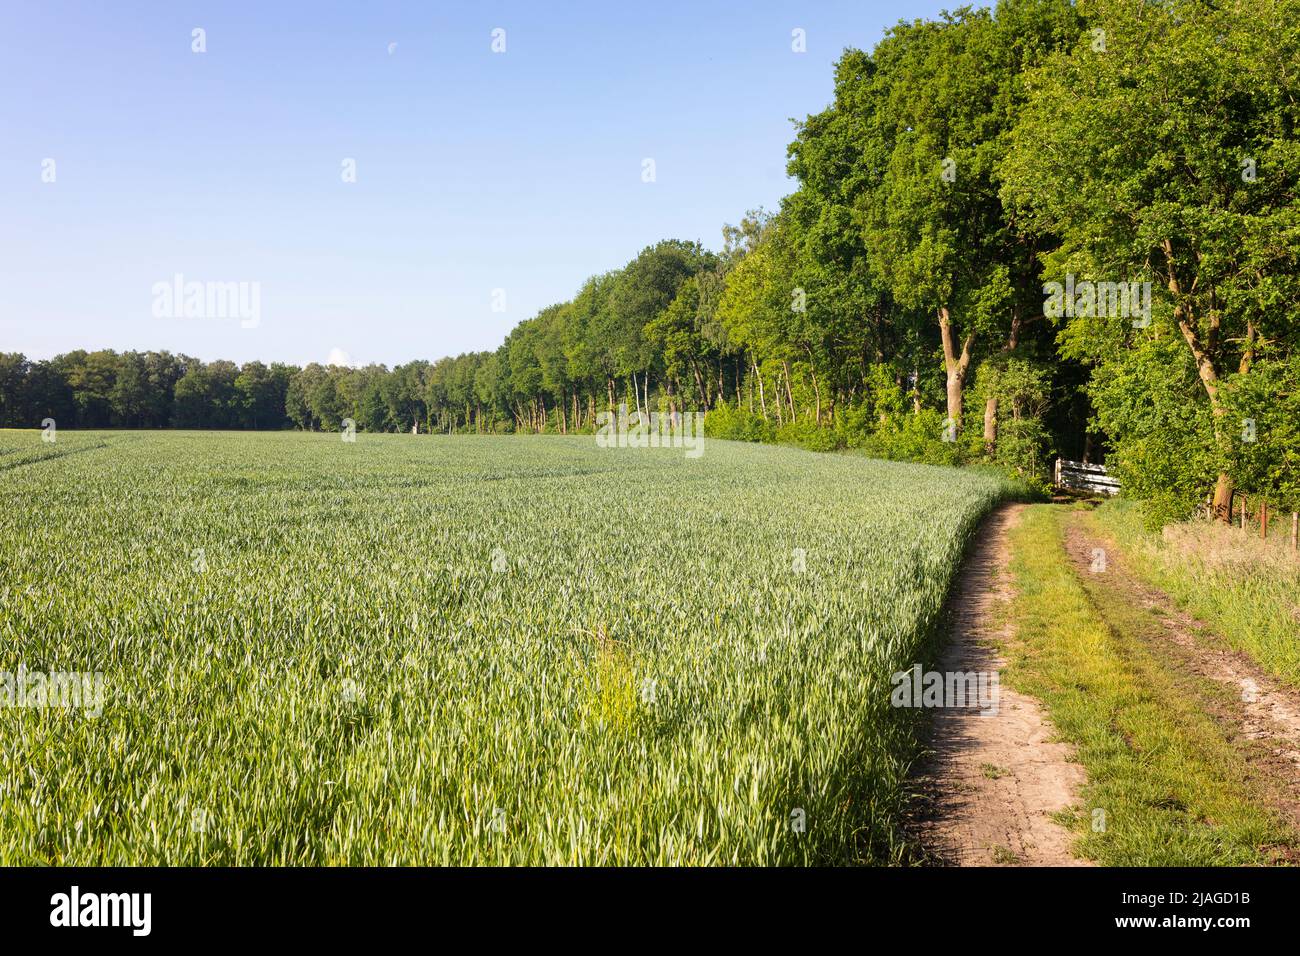 Field with young plants of corn in Northern Germany (Lower Saxony) Stock Photo